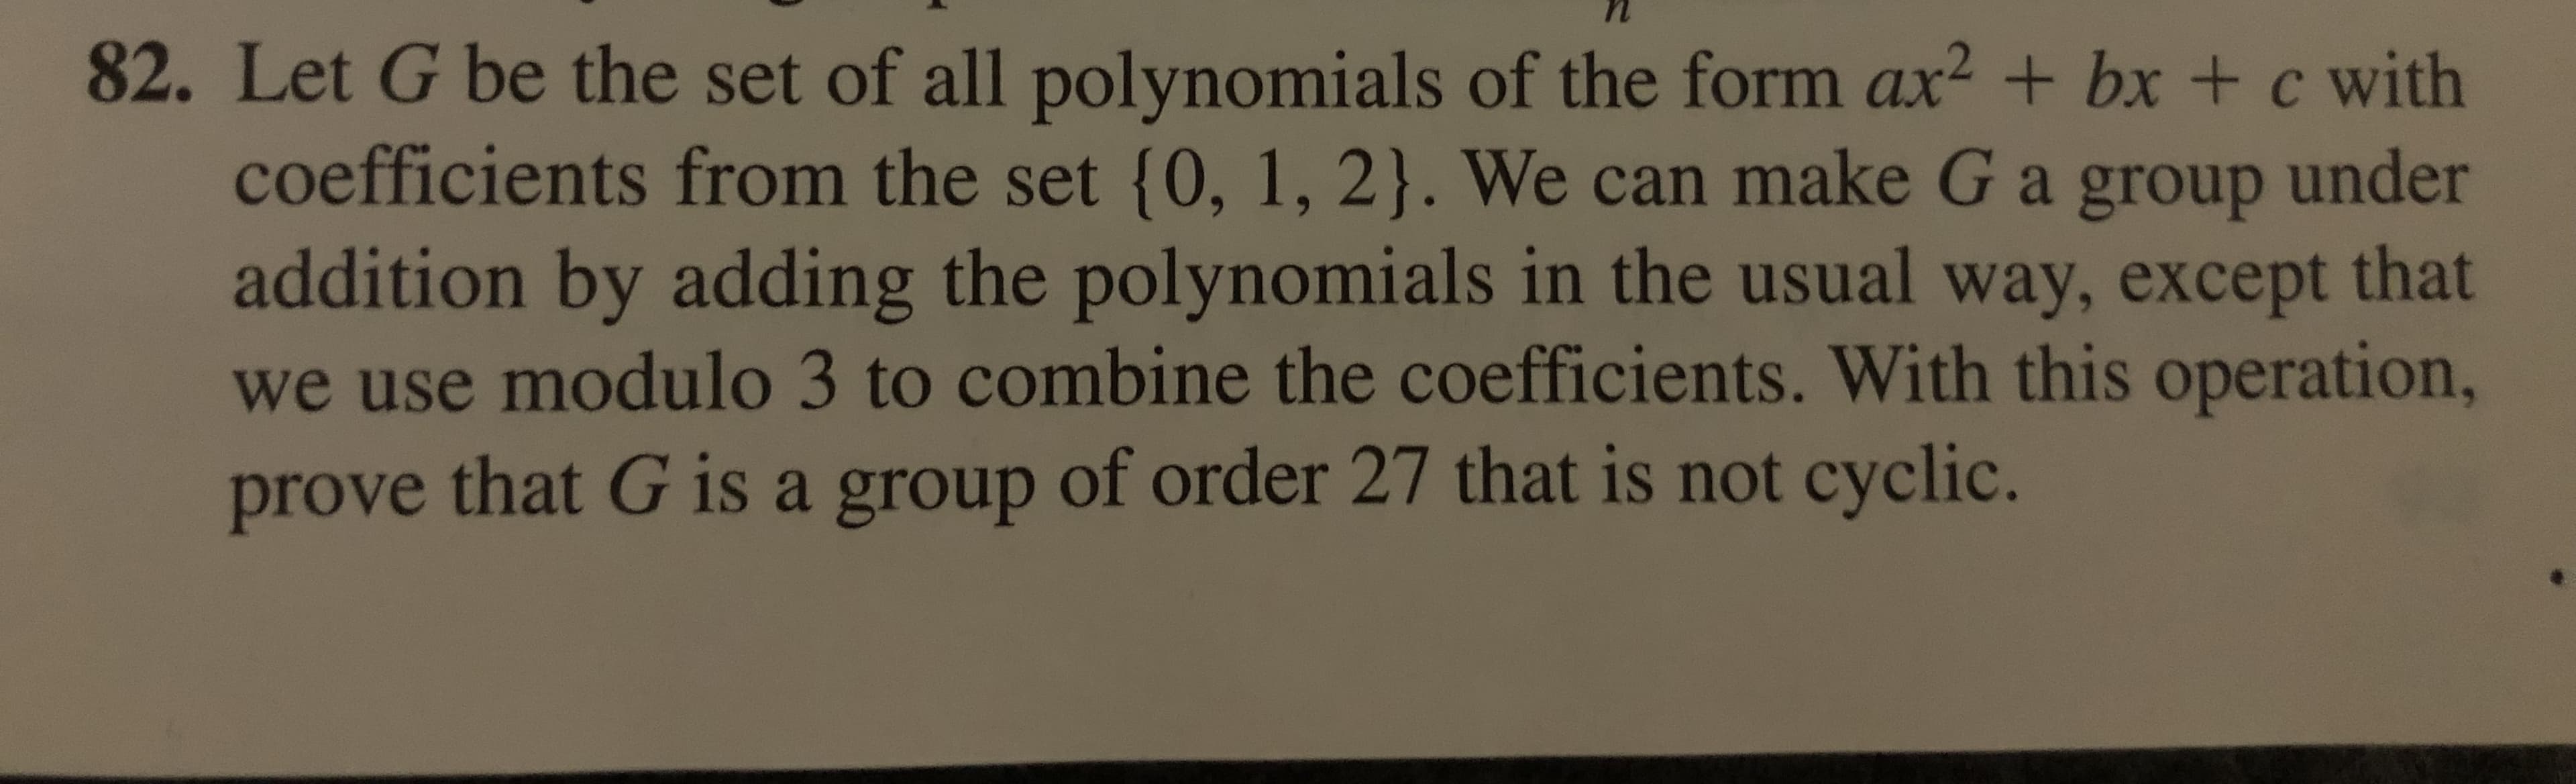 82. Let G be the set of all polynomi als of the form ax2 + bx + c with
coefficients from the set {0, 1, 2}. We can make G a group under
addition by adding the polynomi als in the usual way, except that
we use modulo 3 to combine the coefficients. With this operation,
prove that G is a group of order 27 that is not cyclic.
